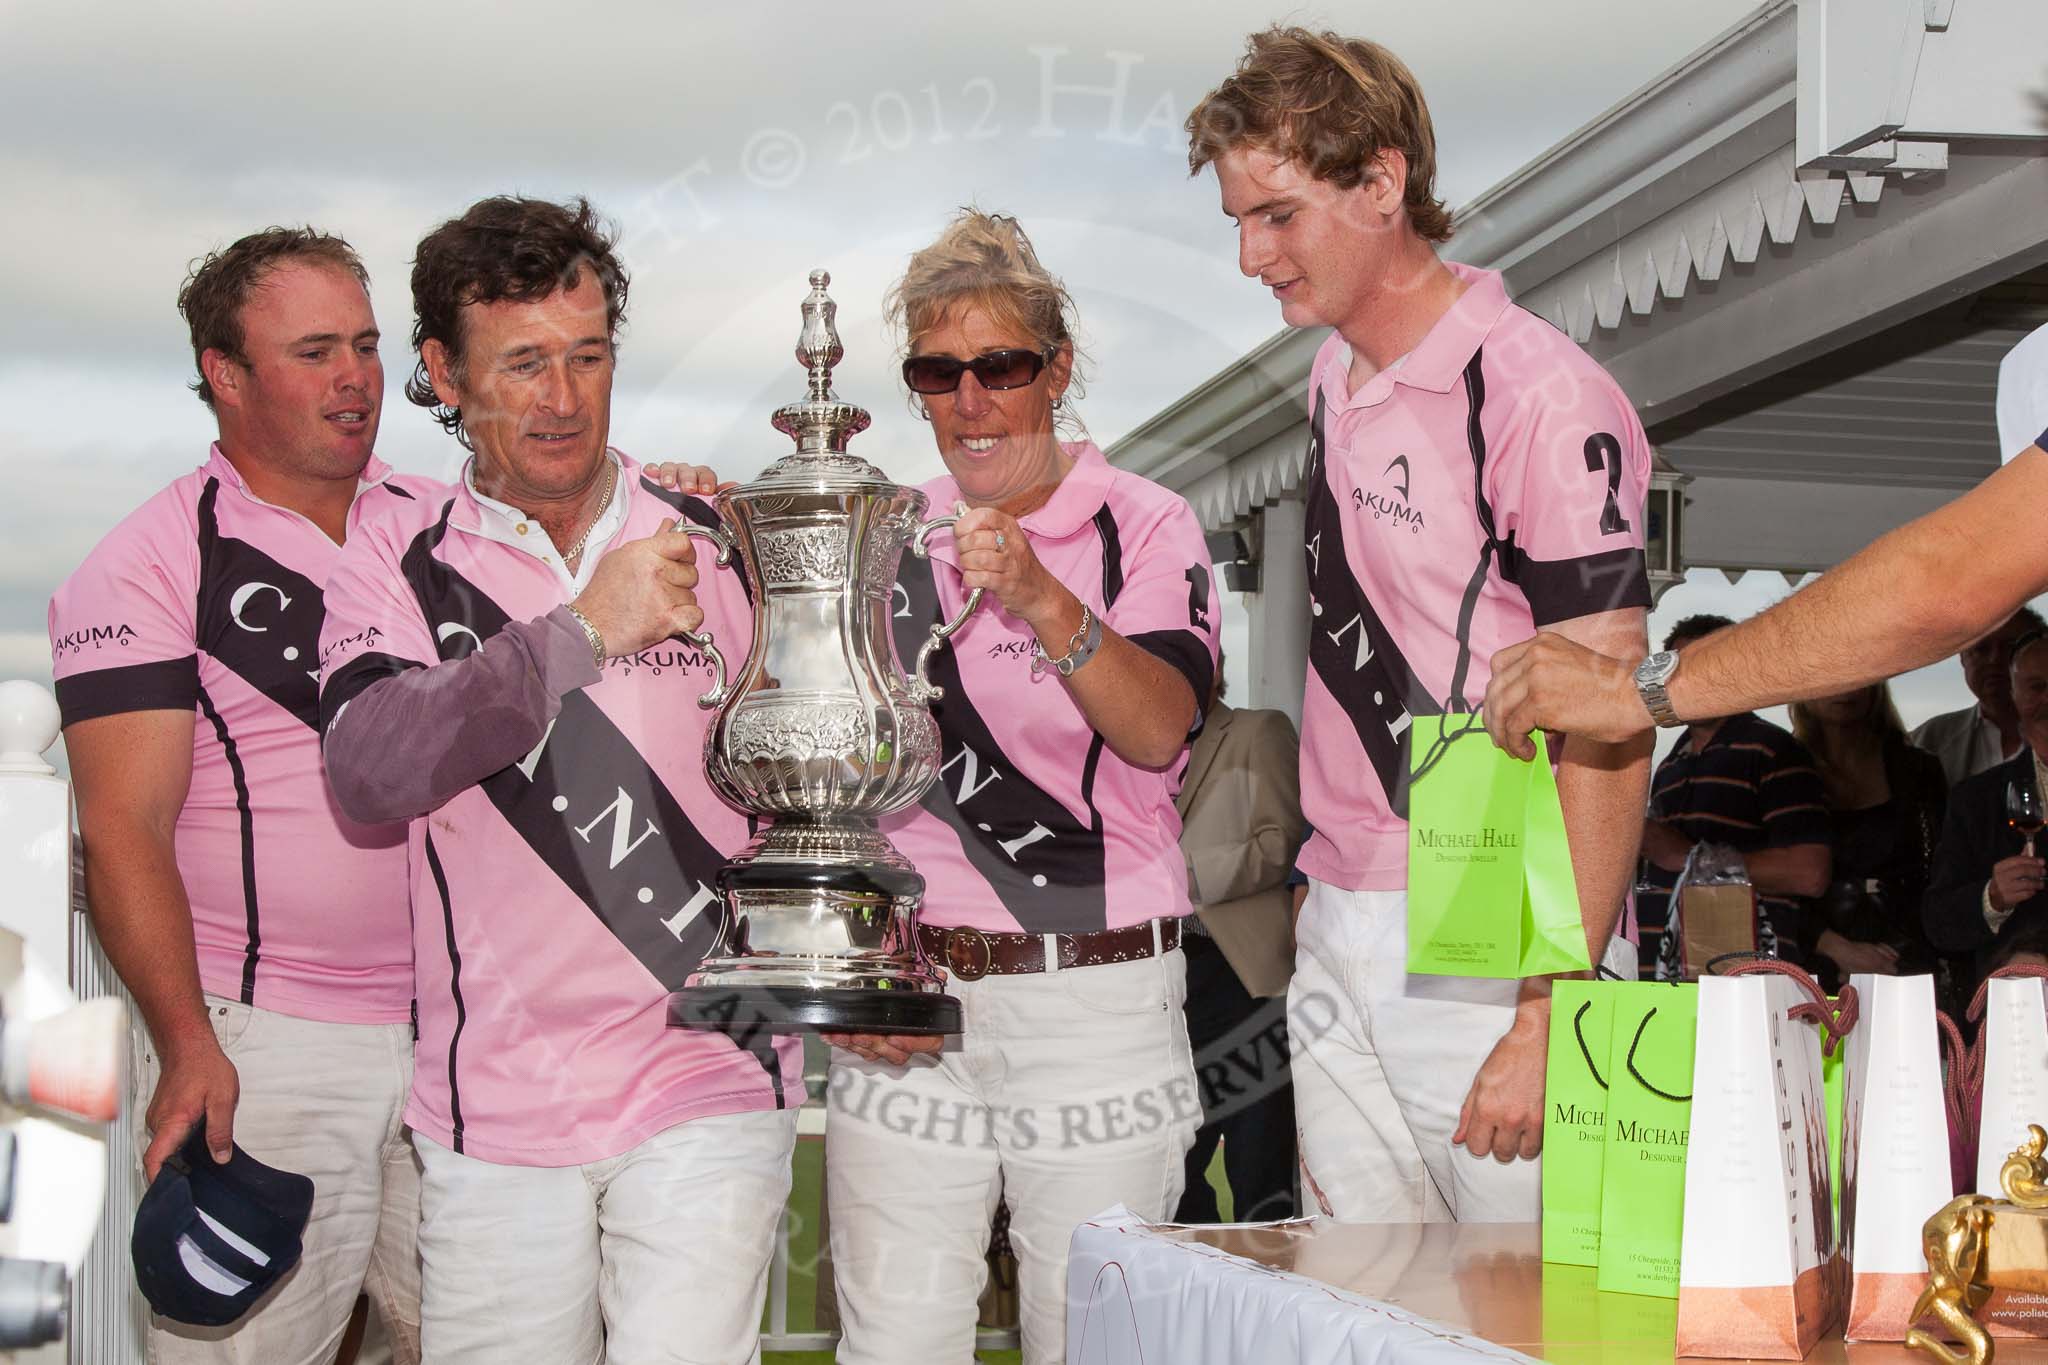 DBPC Polo in the Park 2012: The C.A.N.I. team, winner of the 4 Goal Tusk Trophy Tournament - Grant Collett, Sebastian Funes, Louise Jebsen, and Jamie Potter..
Dallas Burston Polo Club,
Stoneythorpe Estate,
Southam,
Warwickshire,
United Kingdom,
on 16 September 2012 at 16:40, image #253